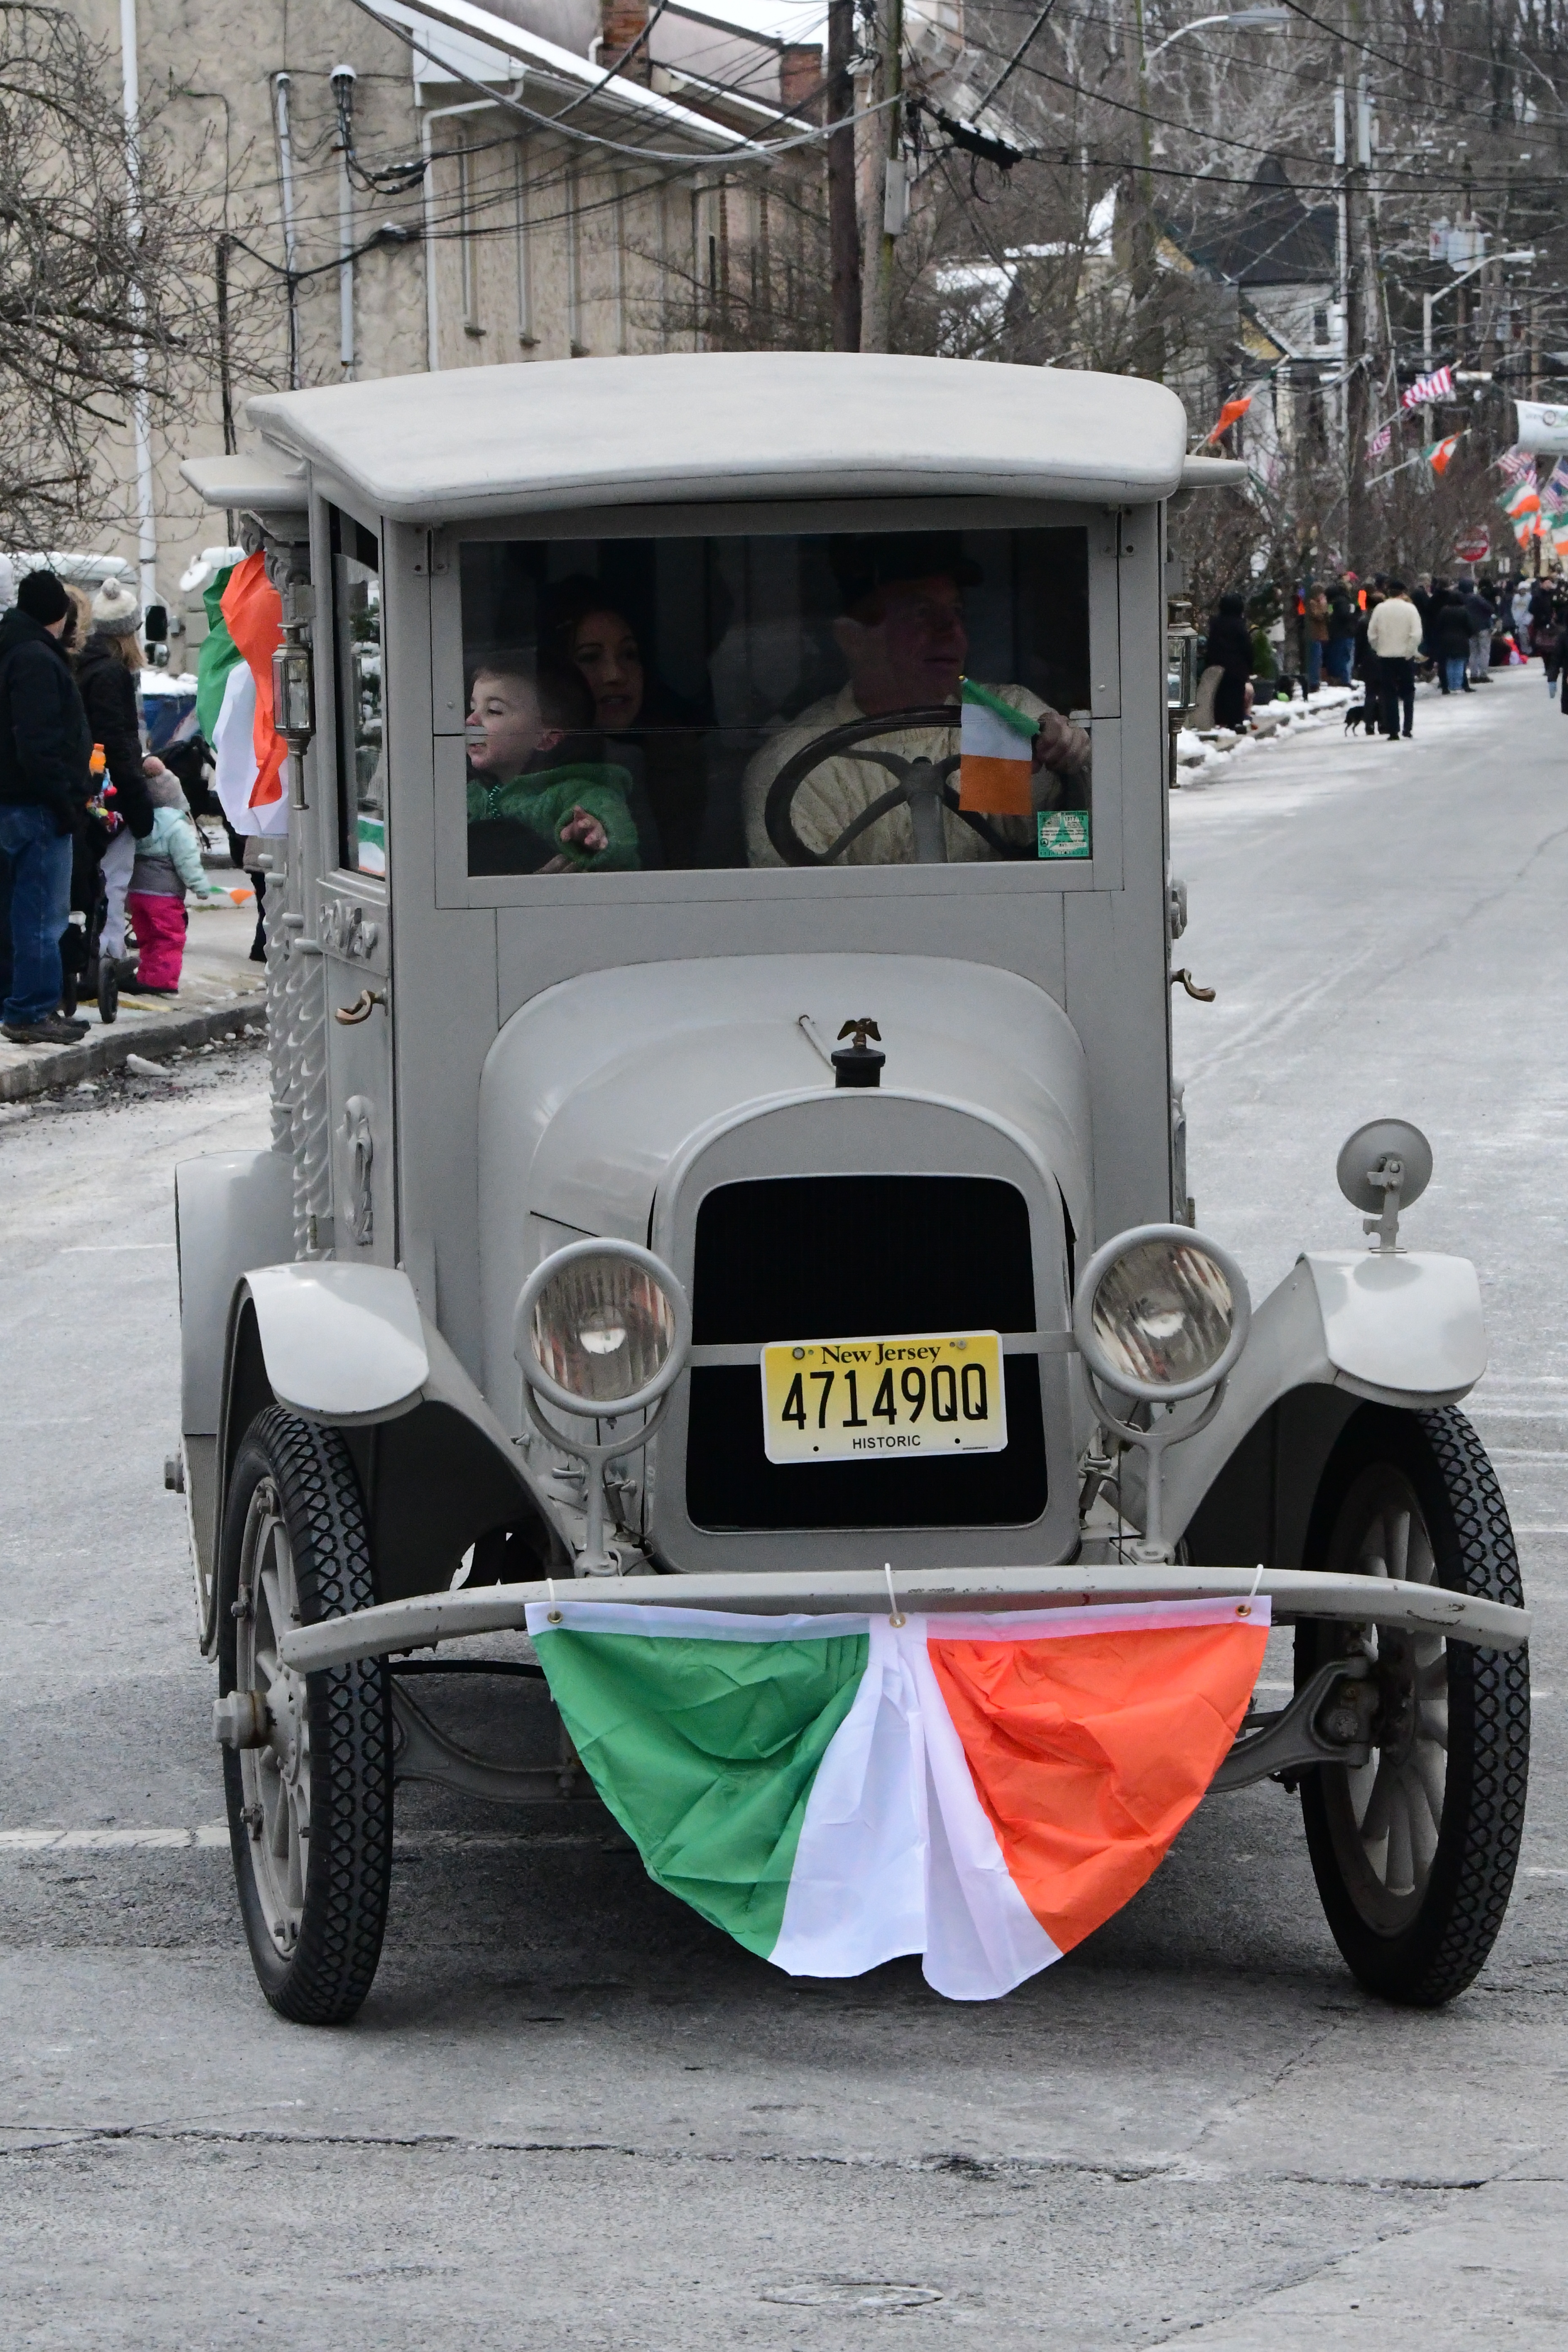 The 2022 St Patrick's Day Parade hosted by the Friendly Sons of St Patrick Hunterdon County took place in Clinton on March 13. Here, Finnegan's Wake - 1919 Wooden Hearse driven by Rich Maguire of Warren Hills Memorial Home.